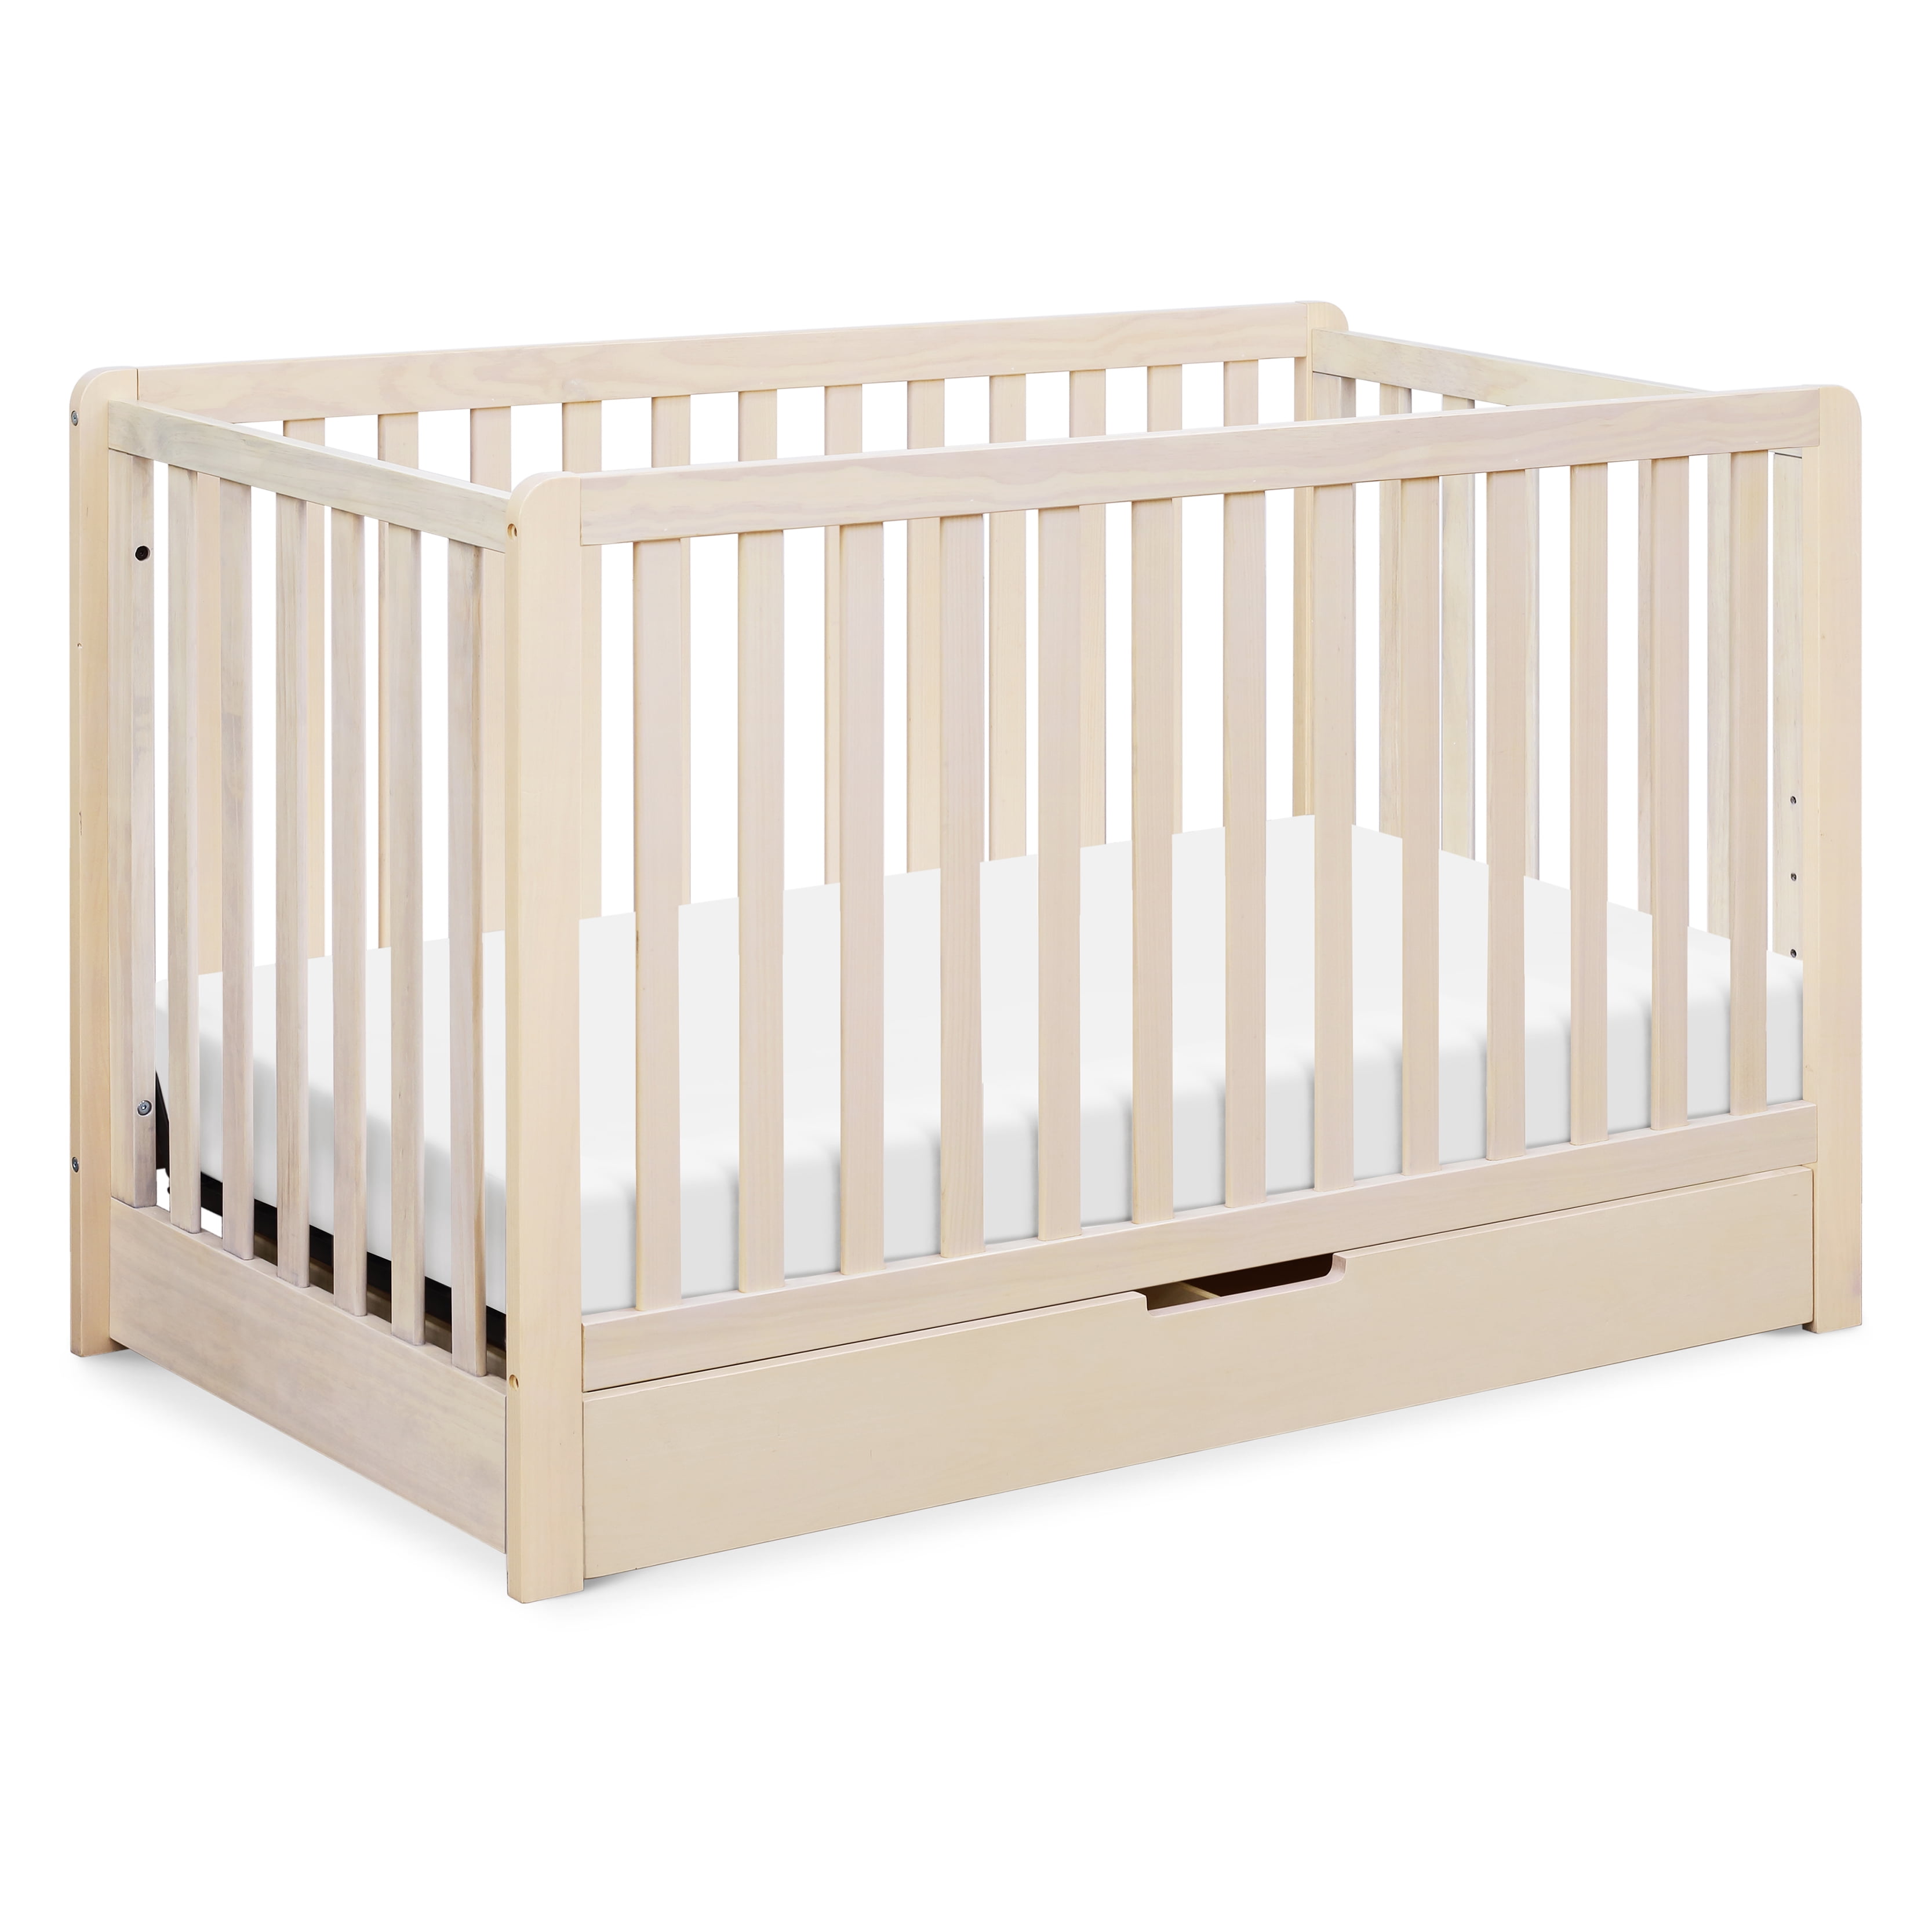 Carter's Colby 4in1 Convertible Crib with Trundle Drawer